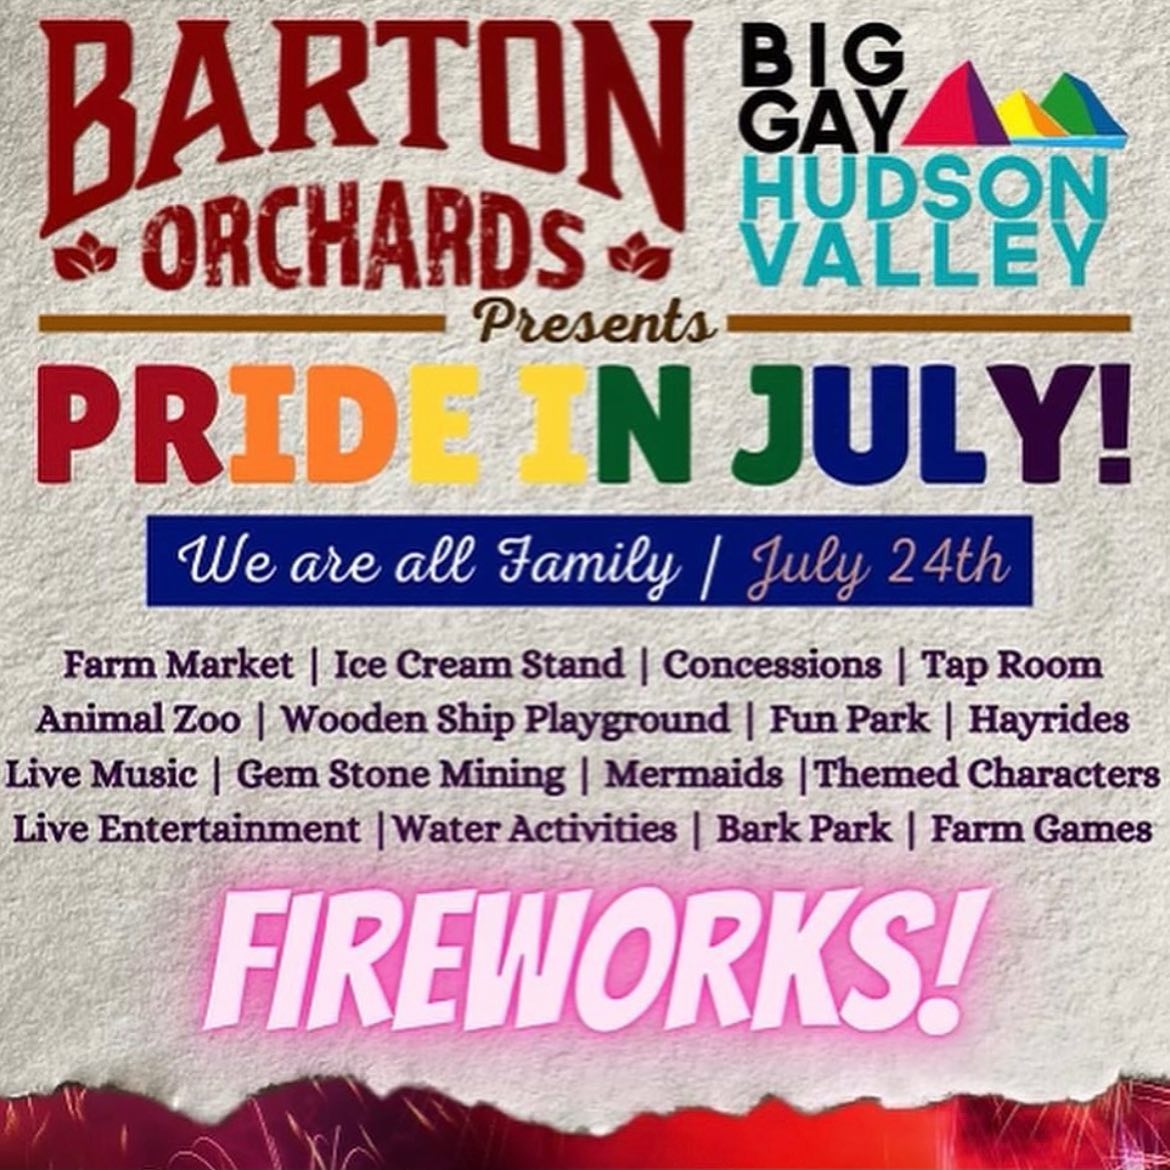 May be an image of text that says 'BARTON BIG GAYAM ORCHARDS HUDSON VALLEY Presents PRIDE IN JULY! We are all Family/ July 24th Farm Market I Ice Cream Stand Concessions Tap Room Animal Zoo Wooden Ship Playground Fun Park Hayrides Live Music Gem Stone Mining Mermaids Themed Characters Live Entertainment |Water Activities Farm Games FIREWORKS!'